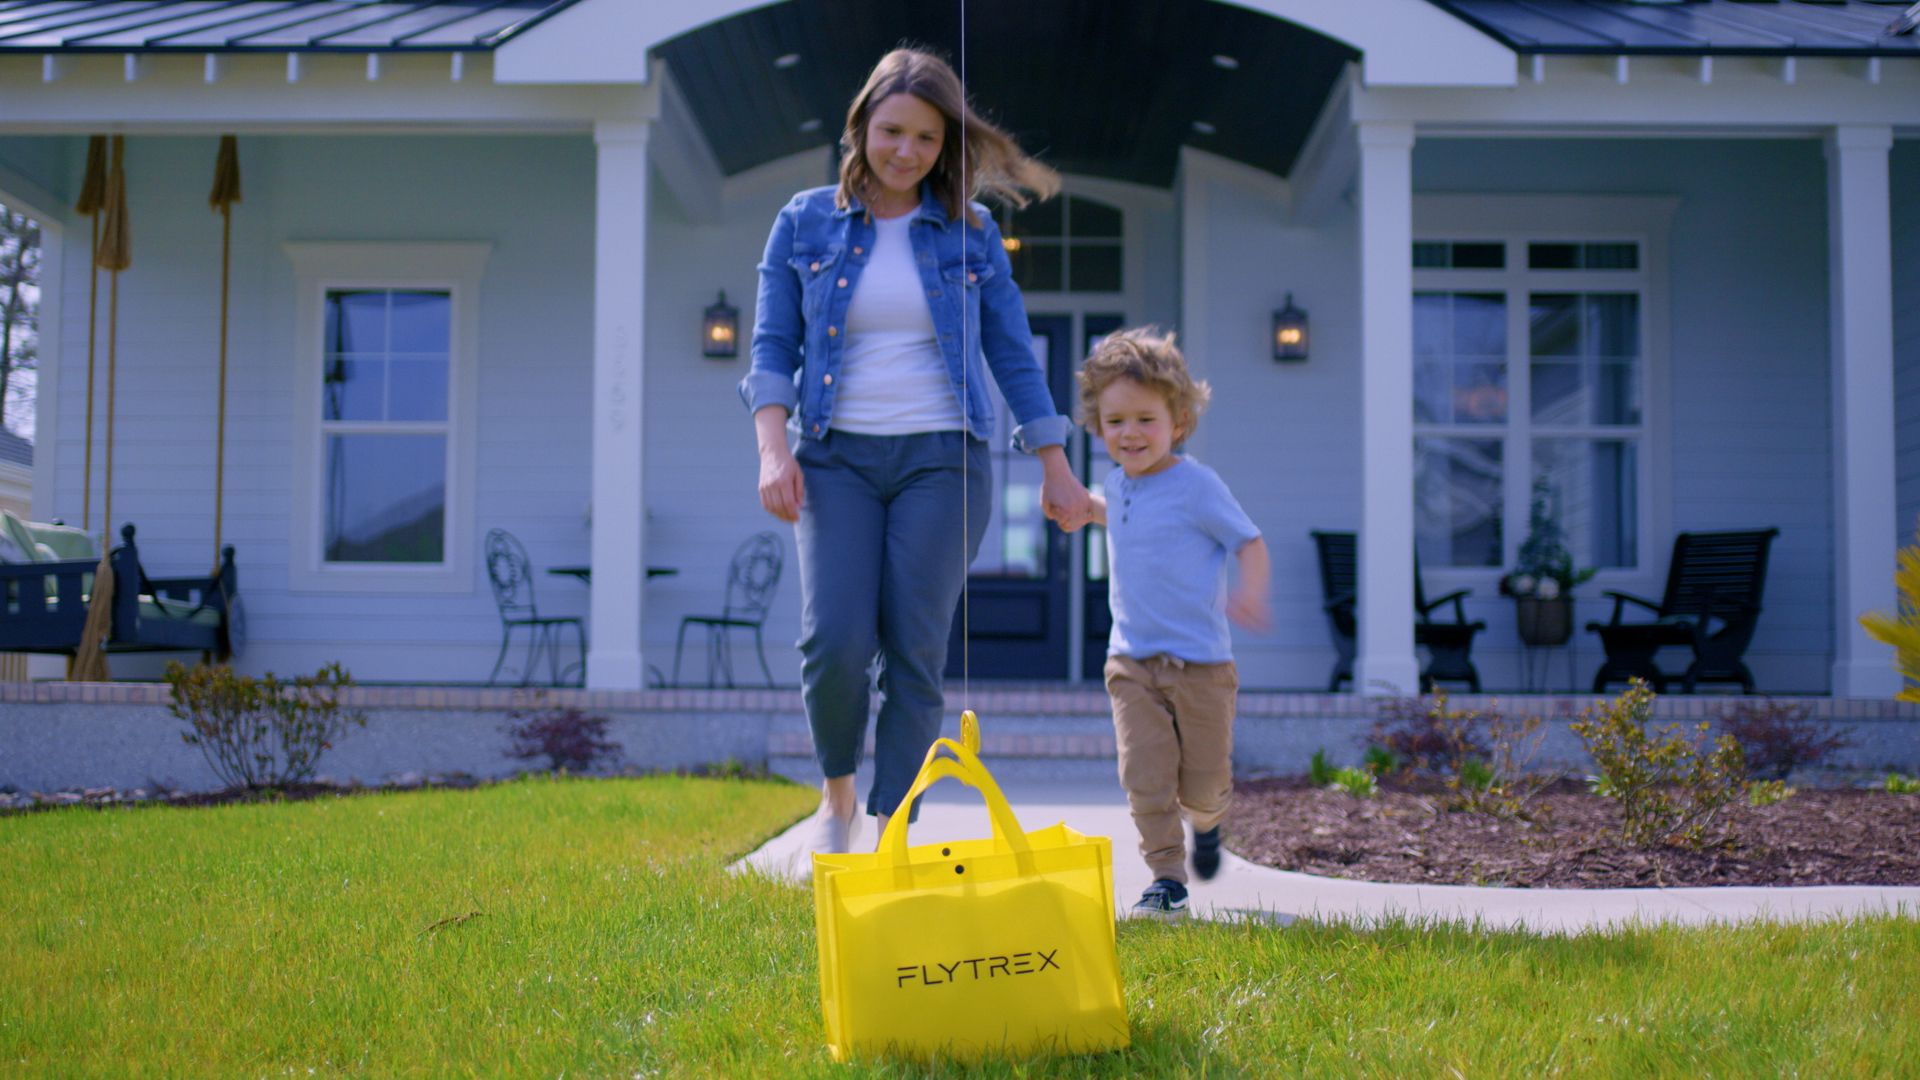 Image of a young child and his mother running to pick up a restaurant order dropped by a Flytrex drone in their yard.